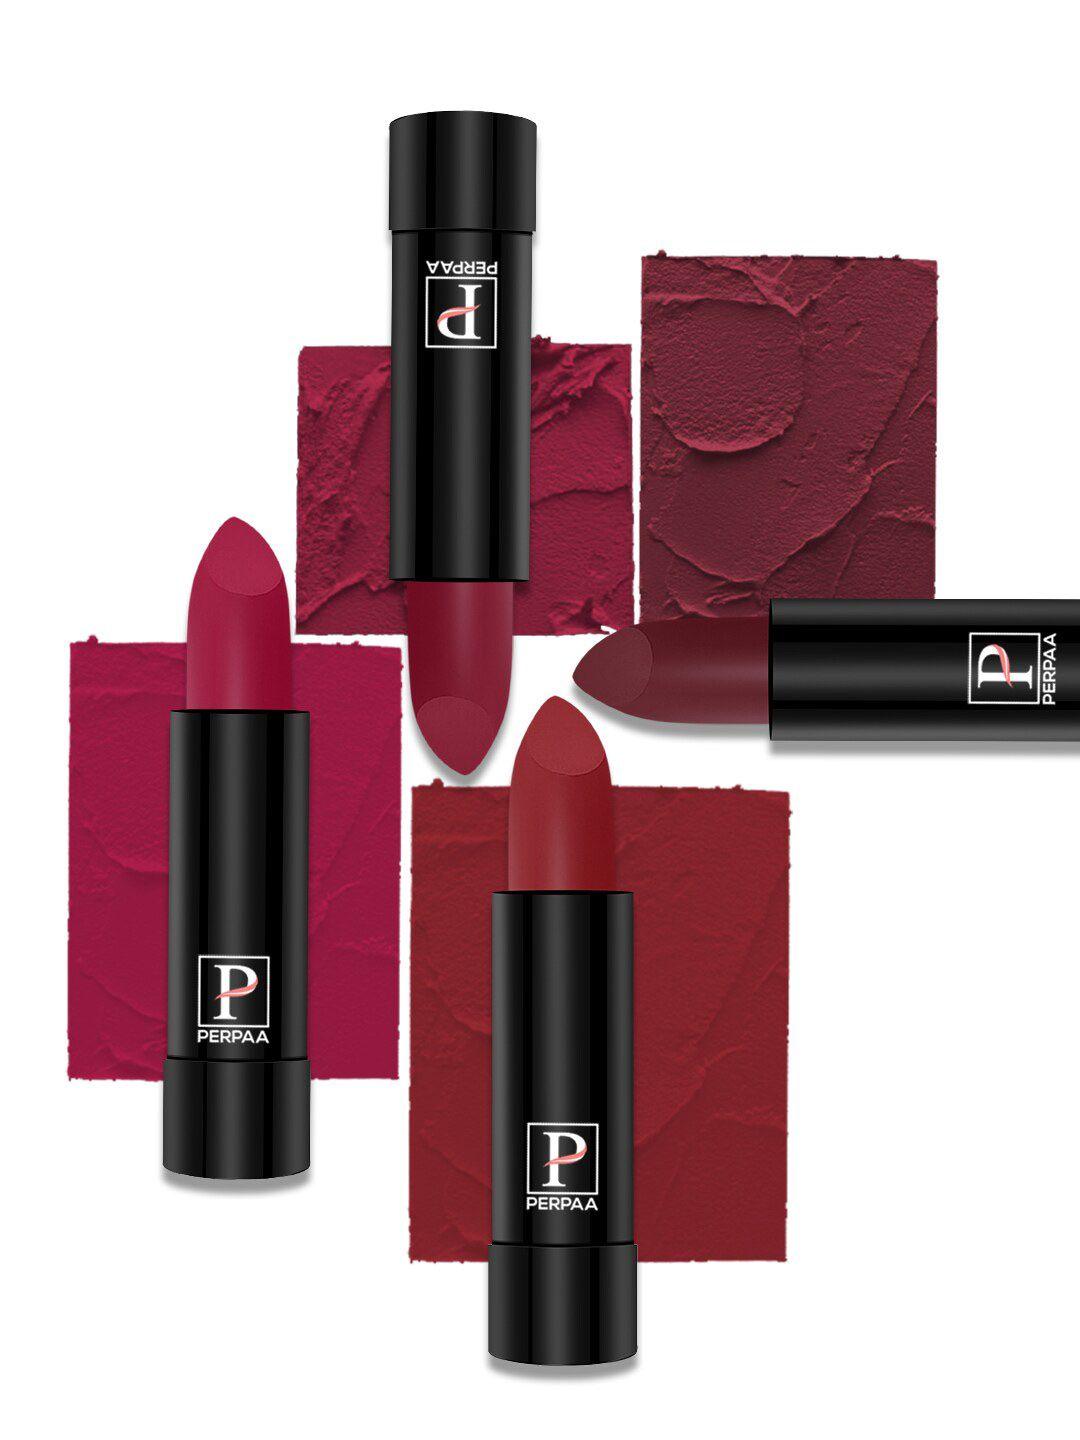 perpaa set of 4 creamy matte long lasting lipstick with beeswax- shades 84 + 86 + 87 + 93